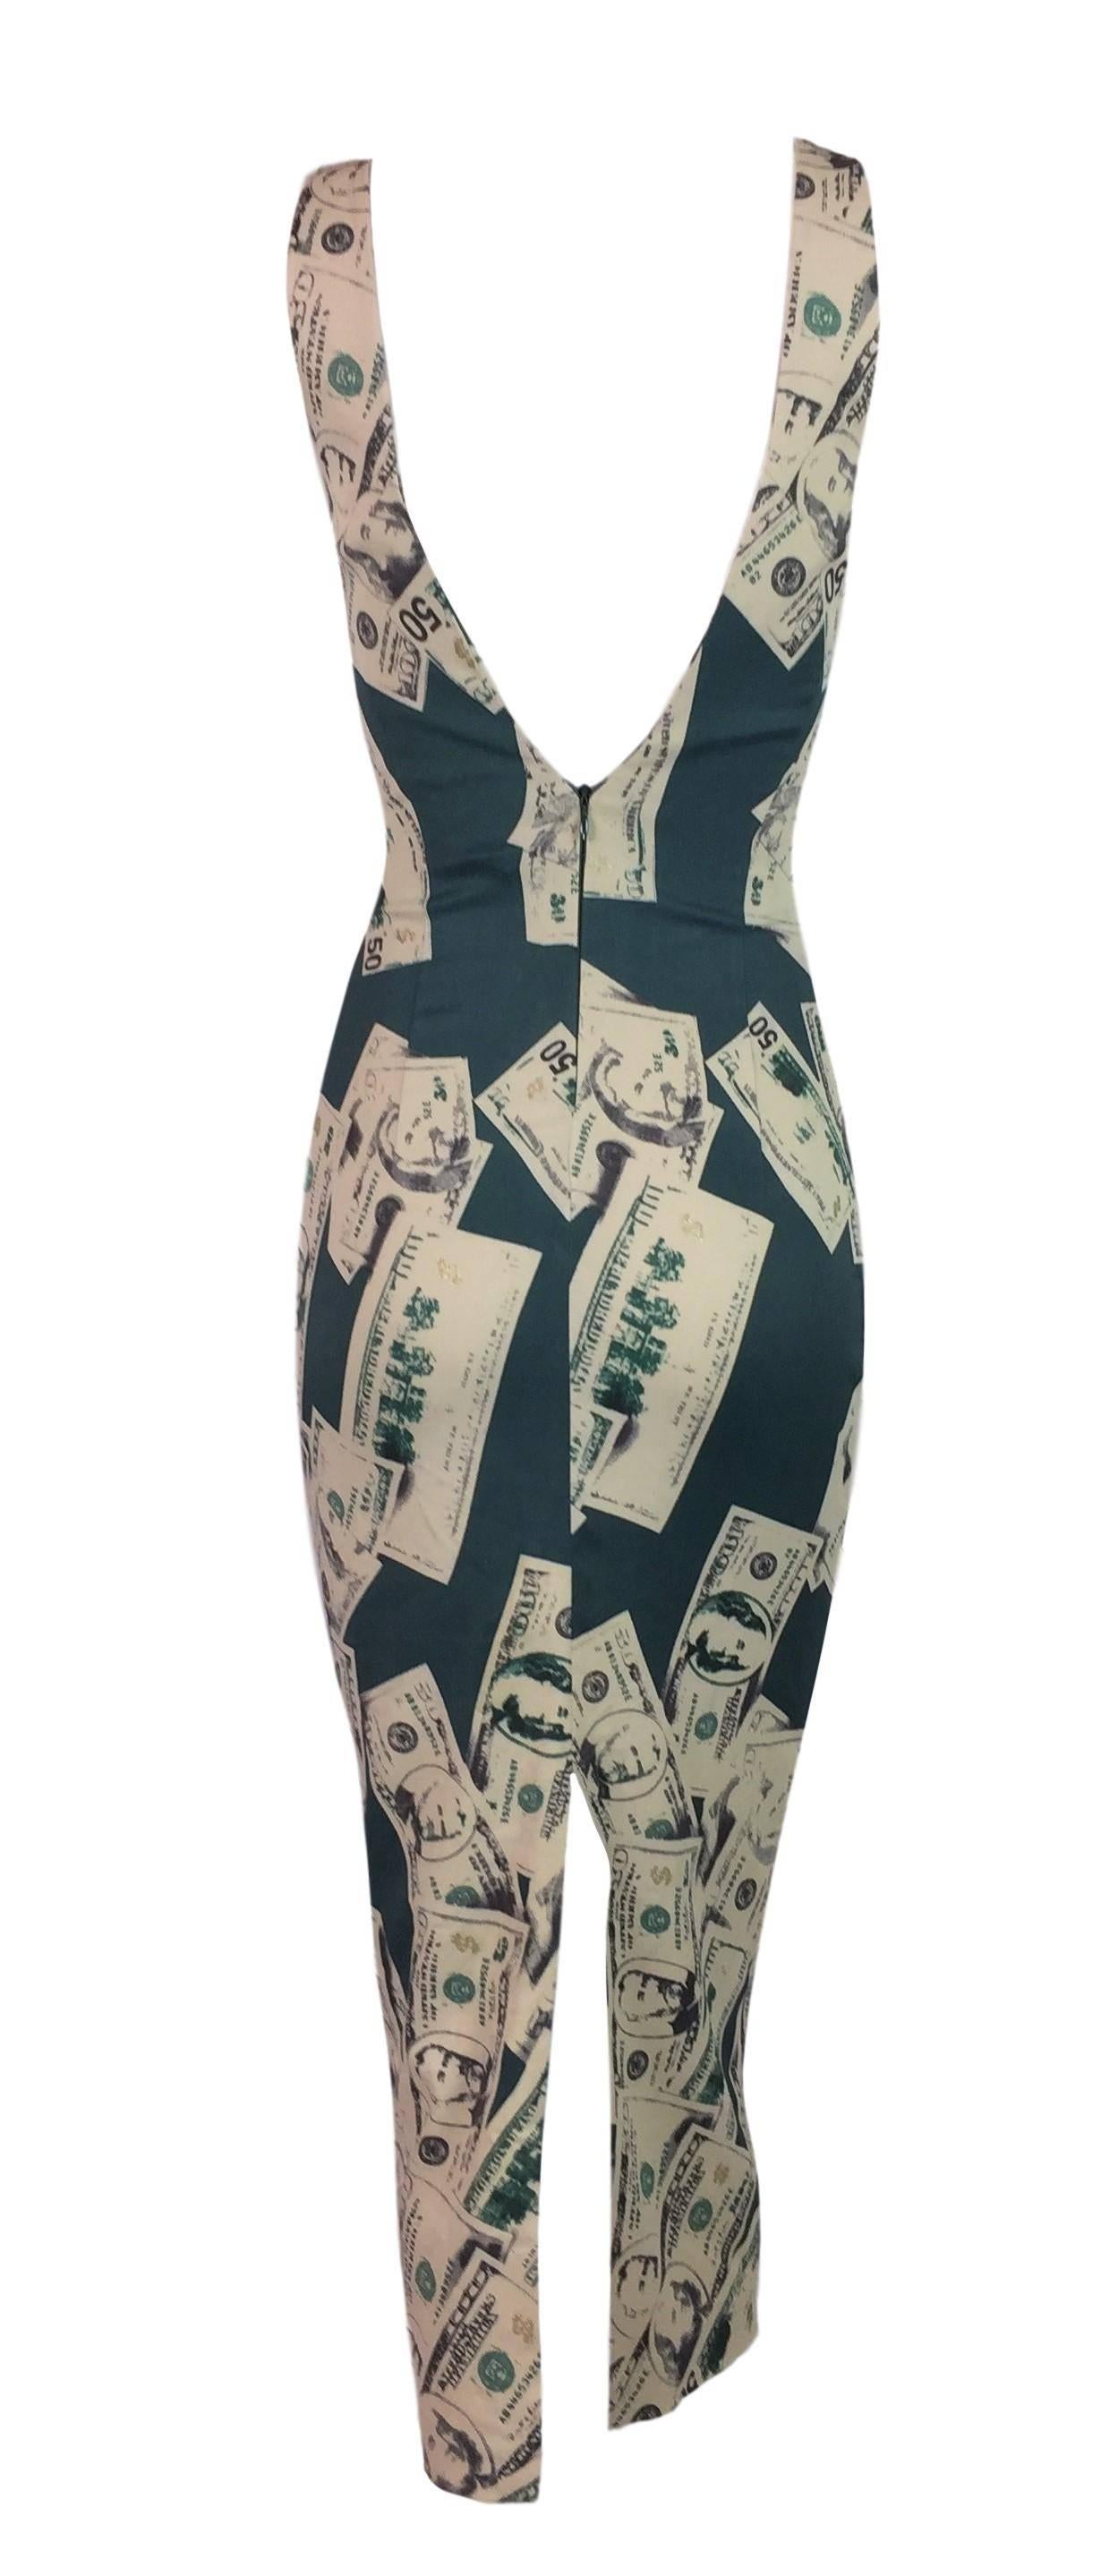 DESIGNER: S/S 2001 D&G by Dolce & Gabbana

Please contact for more information and/or photos.

CONDITION: Good- Some of the bills have green that appears to be just part of the print, not sure, please see many photos provided. Extremely minor!